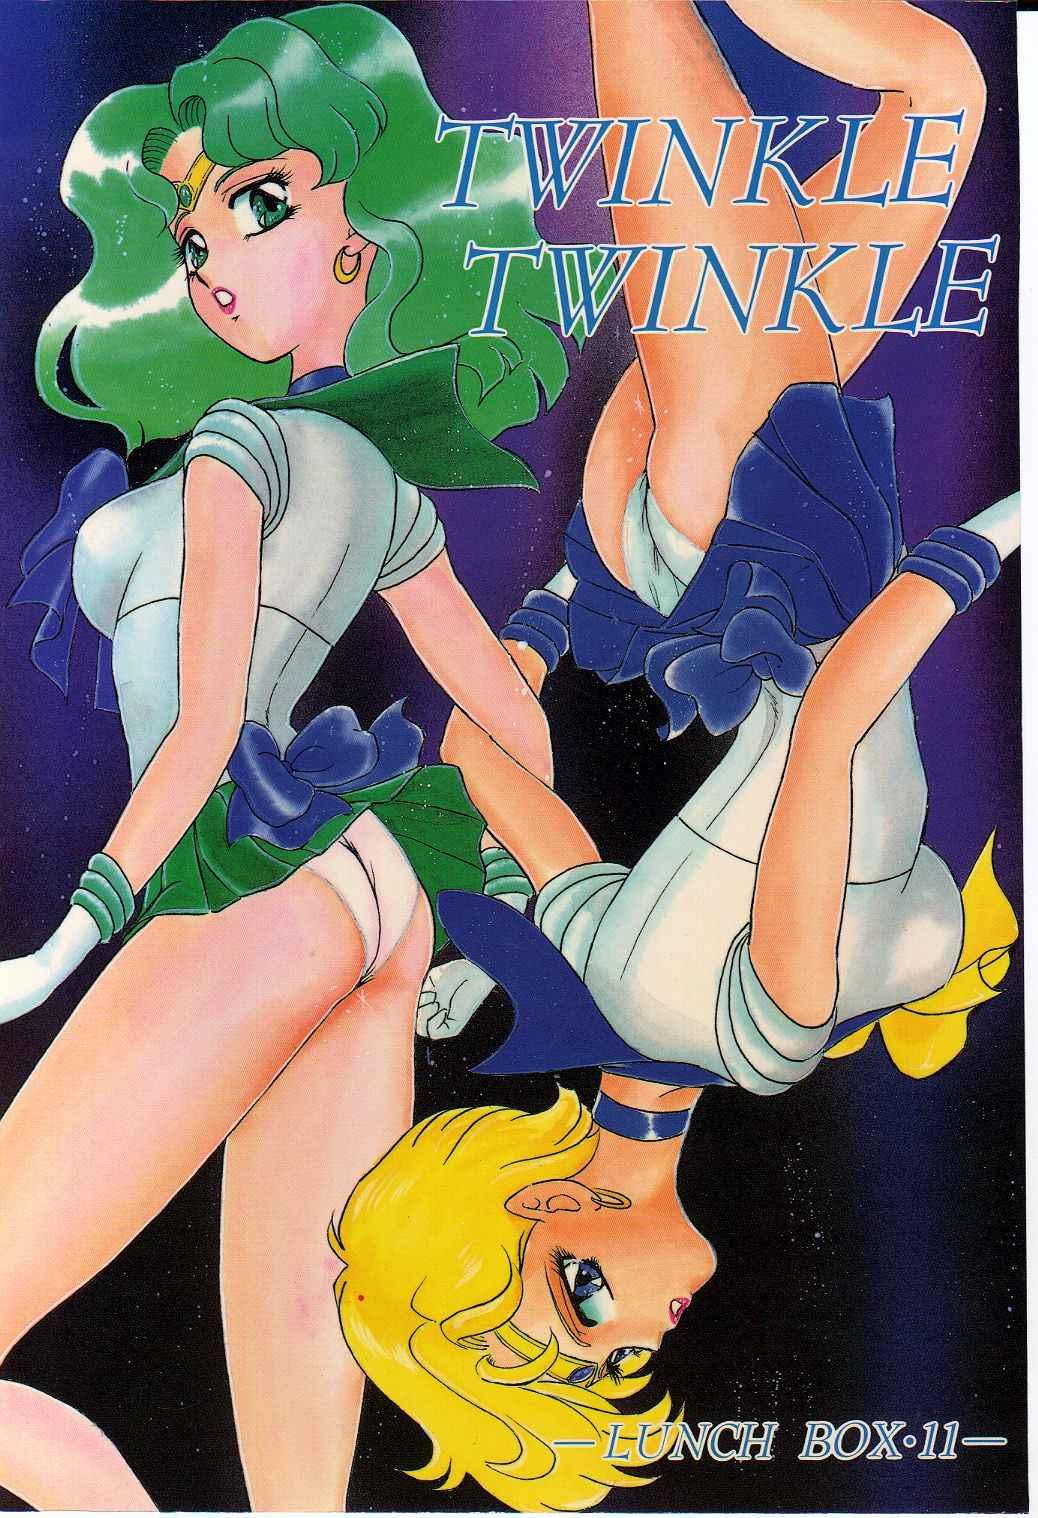 Free Hard Core Porn Lunch Box 11 - Twinkle Twinkle - Sailor moon Anus - Page 1